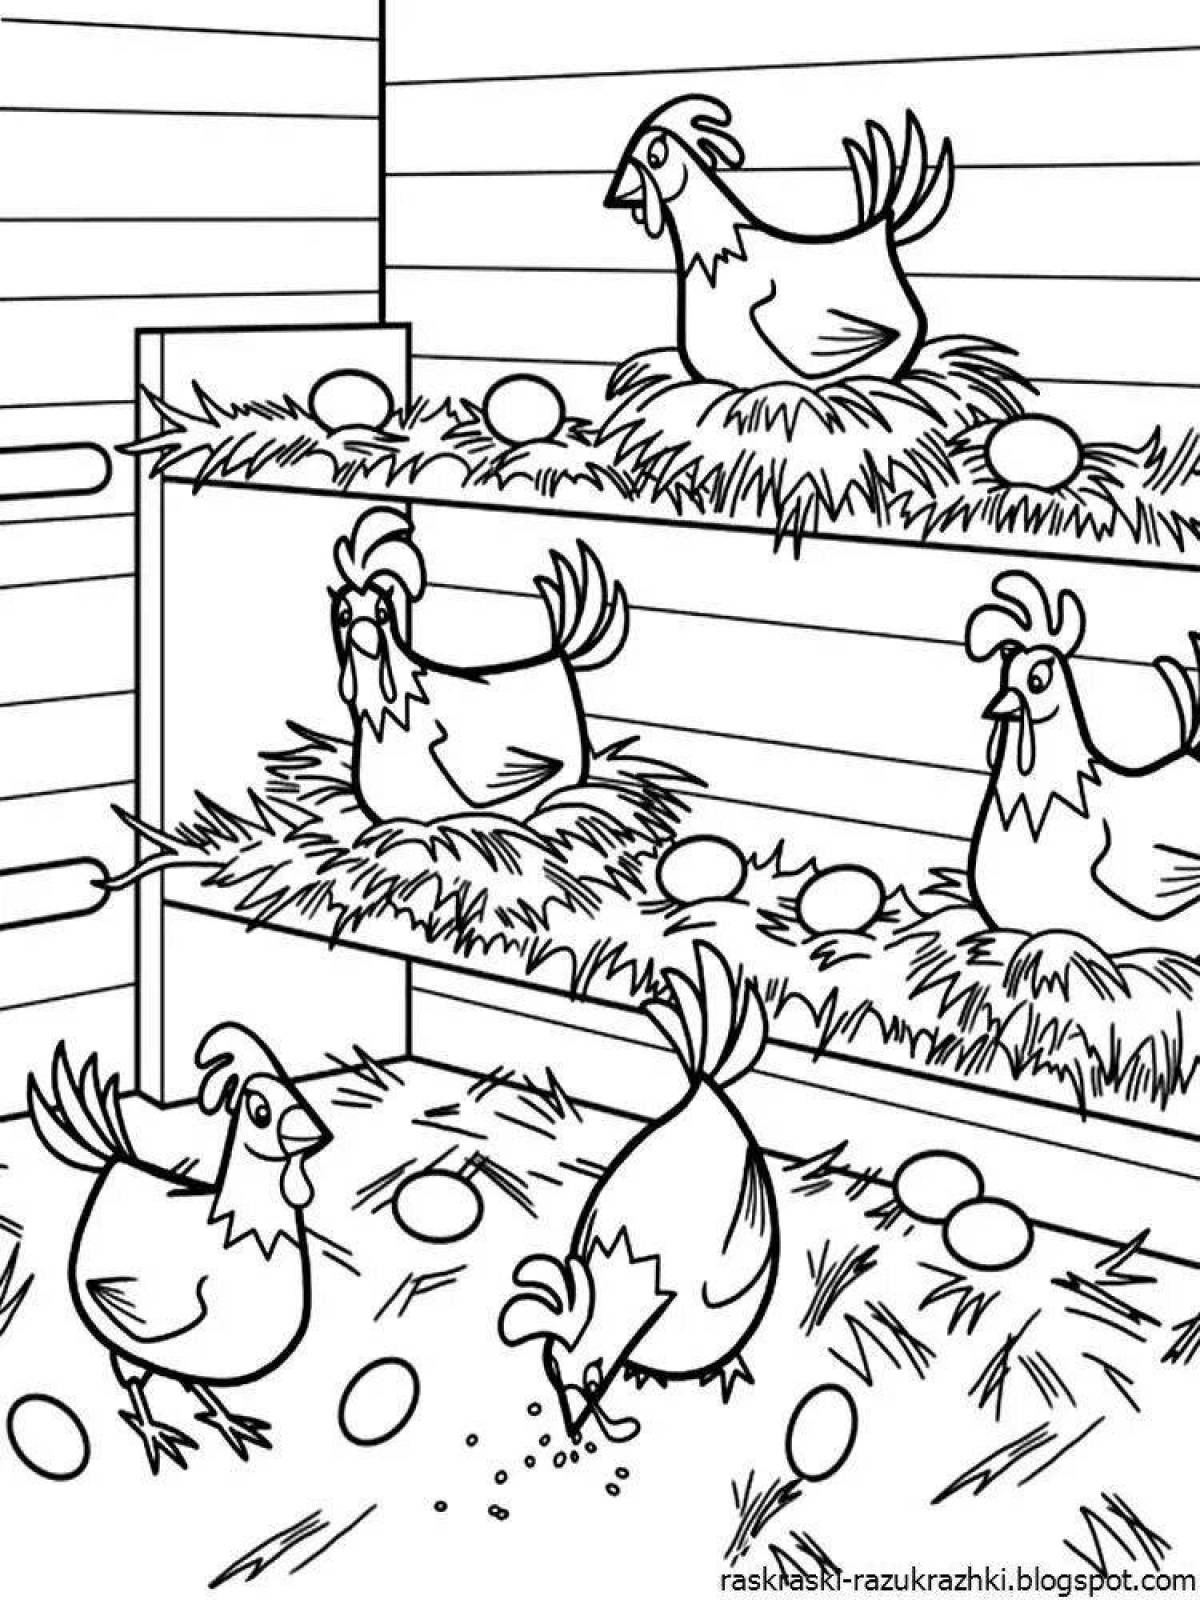 Cute bird coloring page for babies